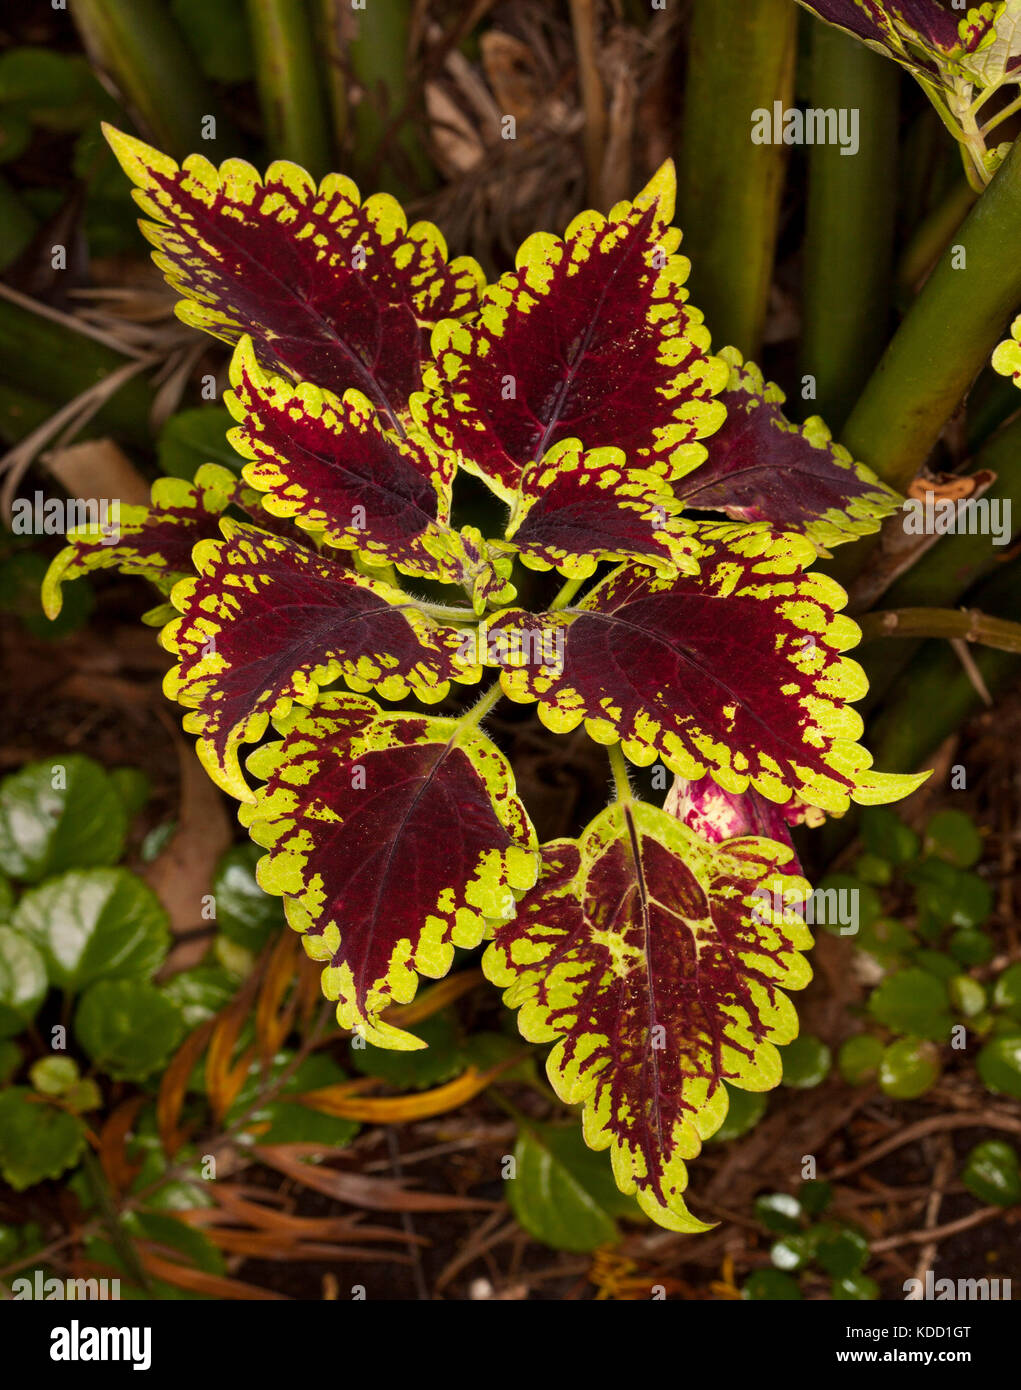 Colourful dark red and yellow variegated foliage of coleus, Solenostemon cultivar 'Carnival' Stock Photo